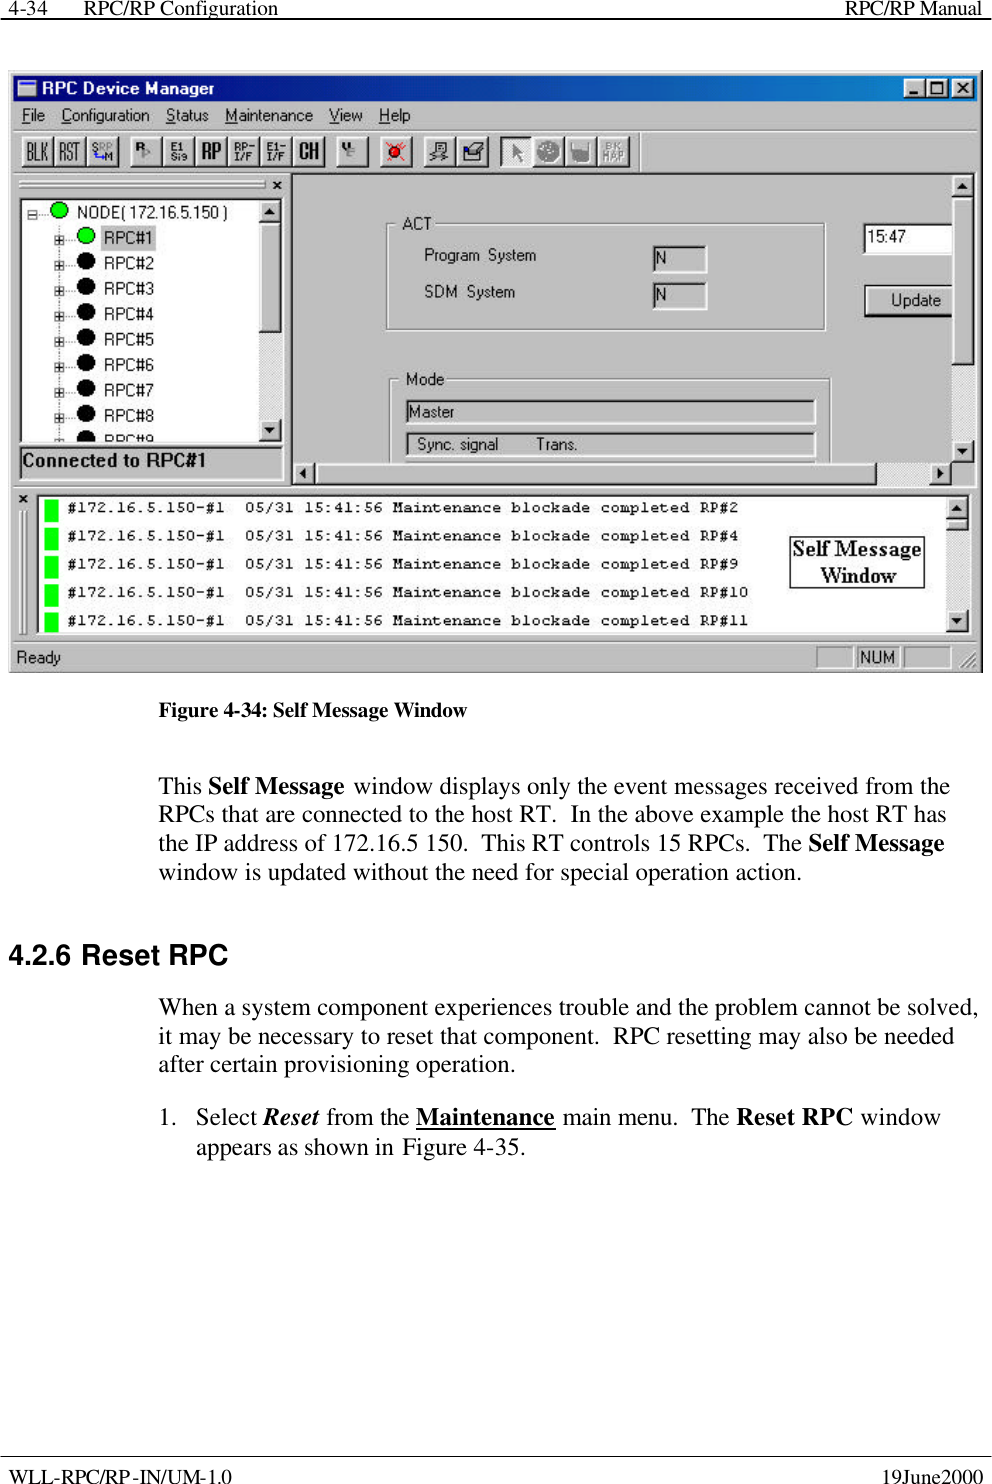  RPC/RP Configuration    RPC/RP Manual   WLL-RPC/RP-IN/UM-1.0    19June2000 4-34 Figure 4-34: Self Message Window This Self Message window displays only the event messages received from the RPCs that are connected to the host RT.  In the above example the host RT has the IP address of 172.16.5 150.  This RT controls 15 RPCs.  The Self Message window is updated without the need for special operation action. 4.2.6 Reset RPC When a system component experiences trouble and the problem cannot be solved, it may be necessary to reset that component.  RPC resetting may also be needed after certain provisioning operation. 1.  Select Reset from the Maintenance main menu.  The Reset RPC window appears as shown in Figure 4-35. 